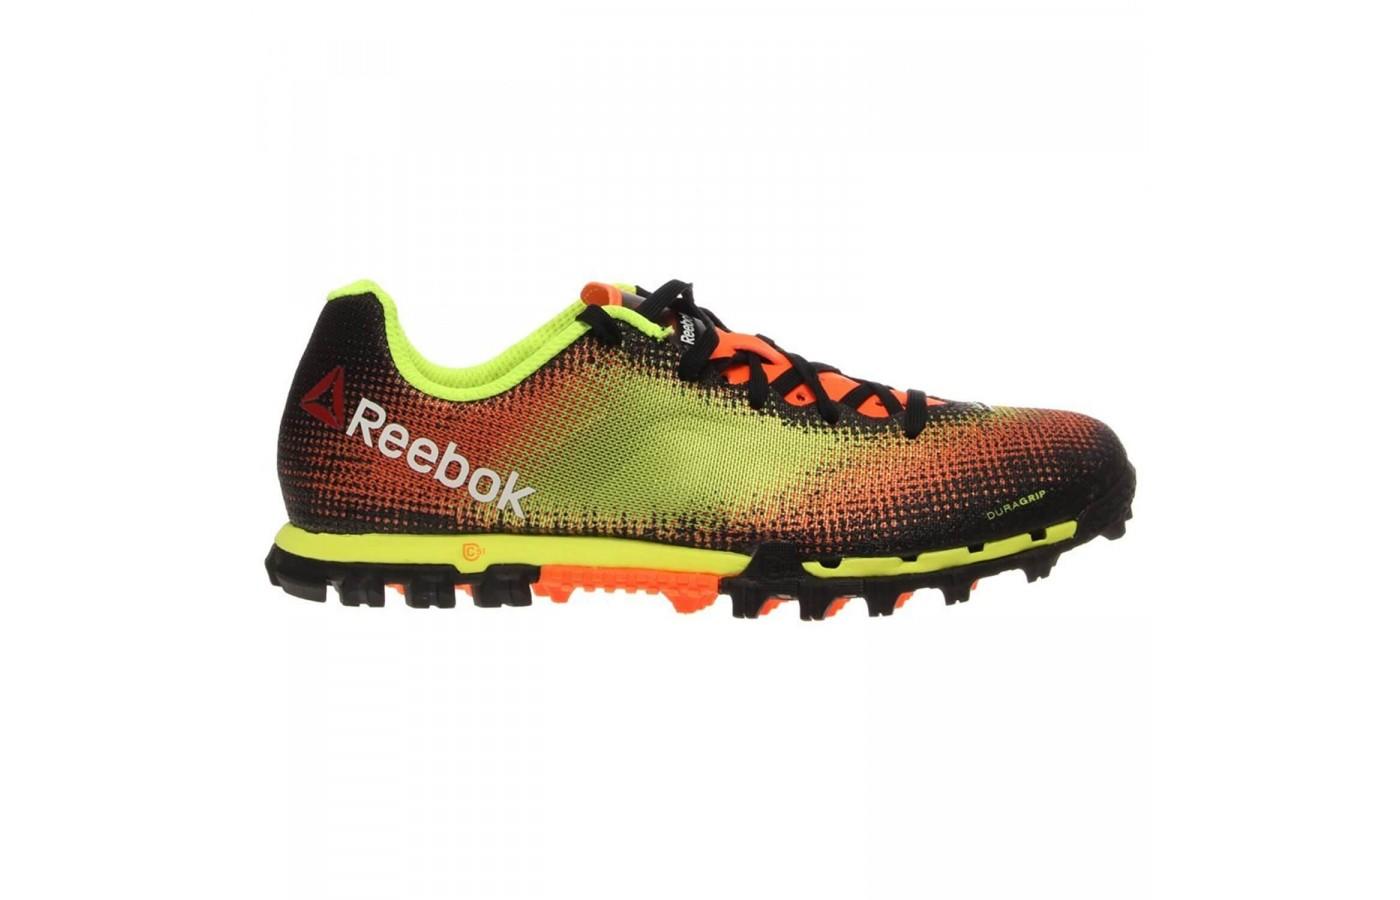 The H2O drainage ports quickly remove water and mud from the Reebok All Terrain Sprint.